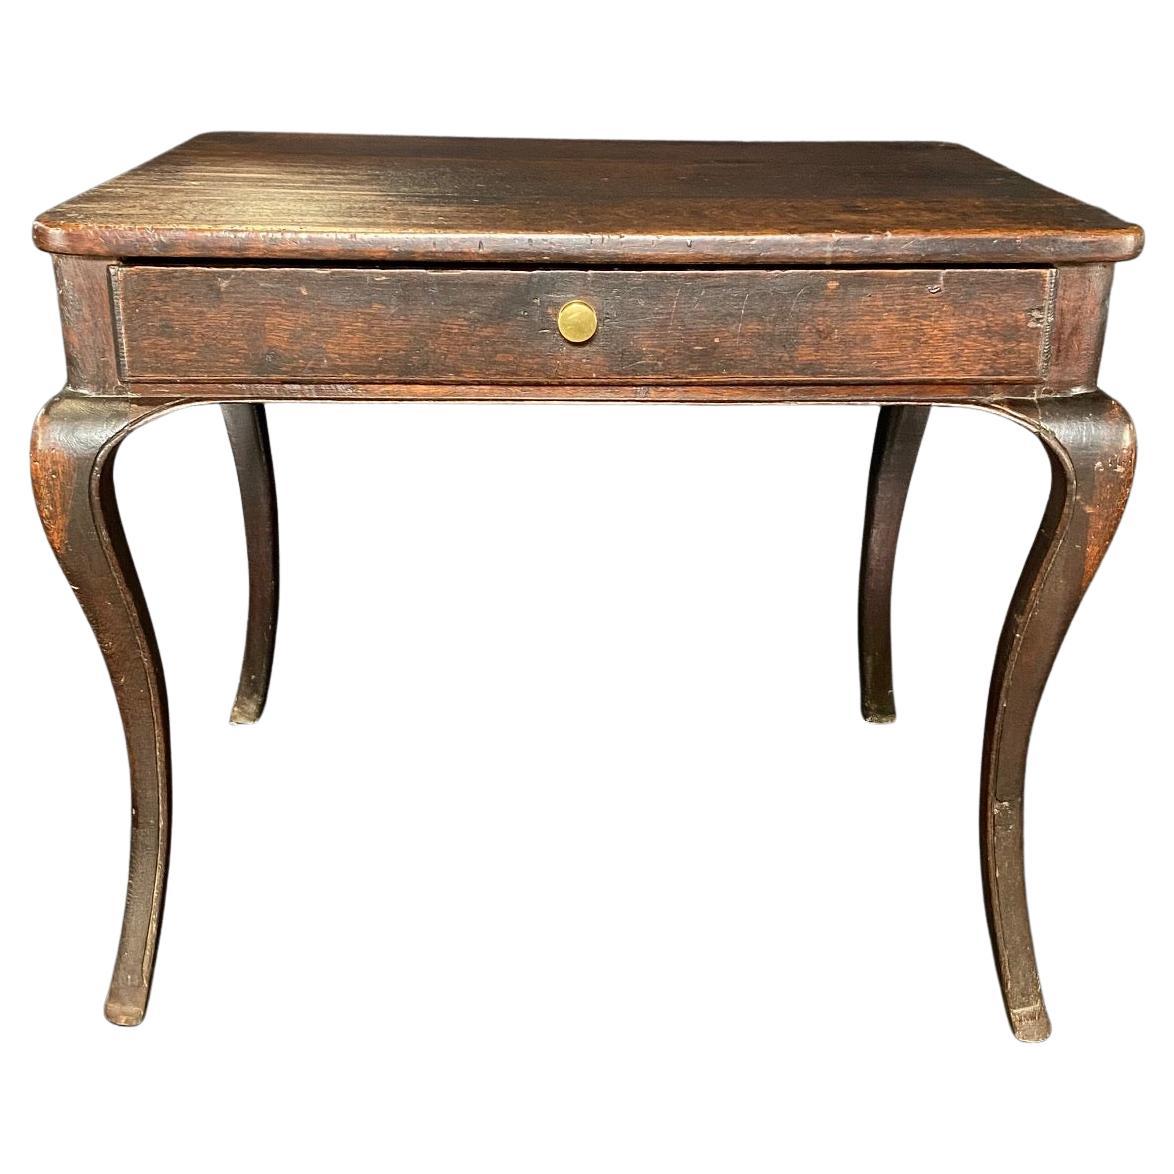 Elegant French Side Table or Desk with Hooved Feet